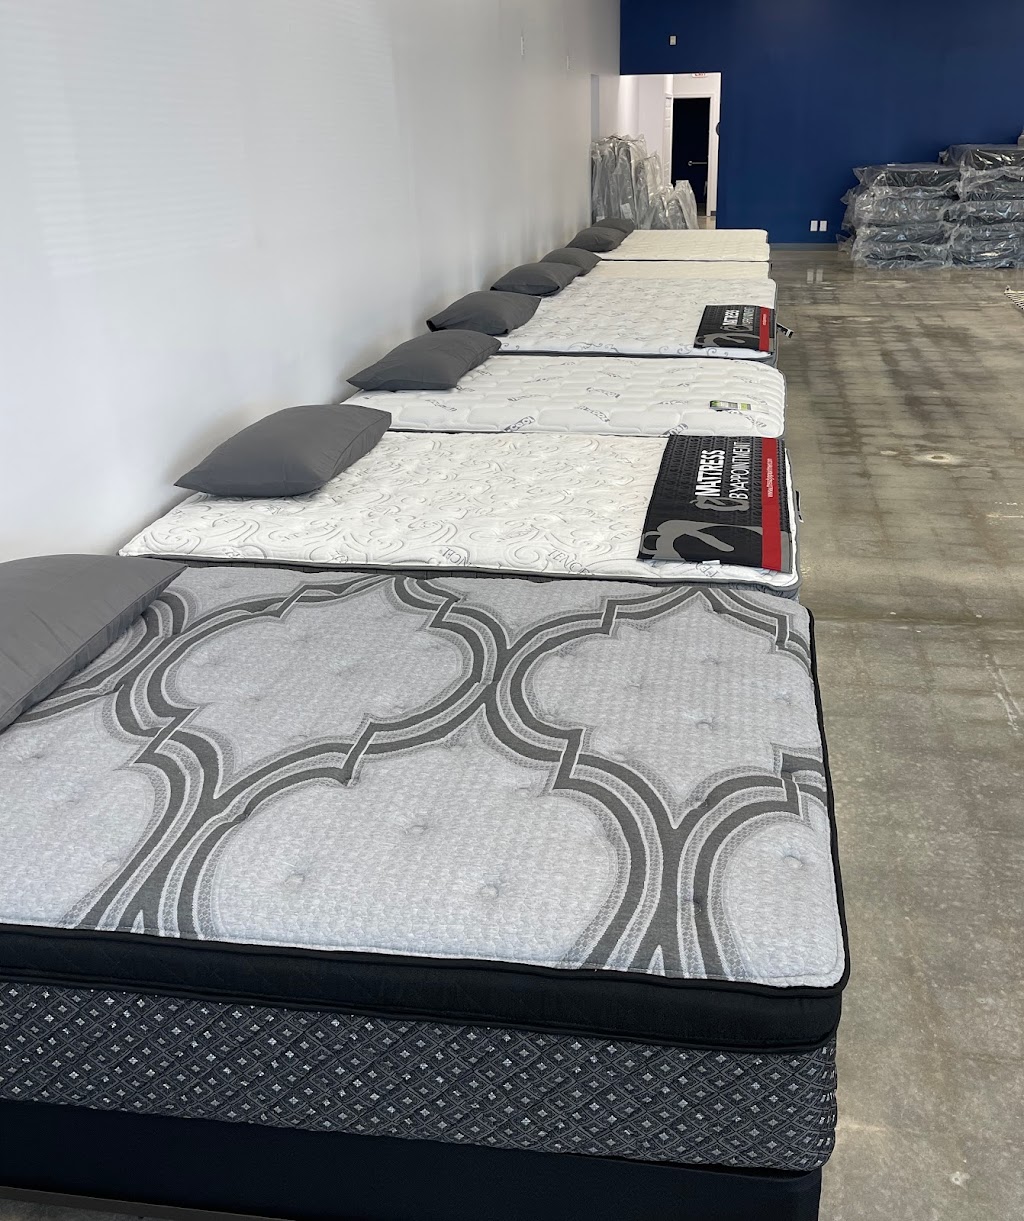 Mattress By Appointment Conyers GA. | 1185 West Ave SW, Conyers, GA 30012, USA | Phone: (770) 250-9992